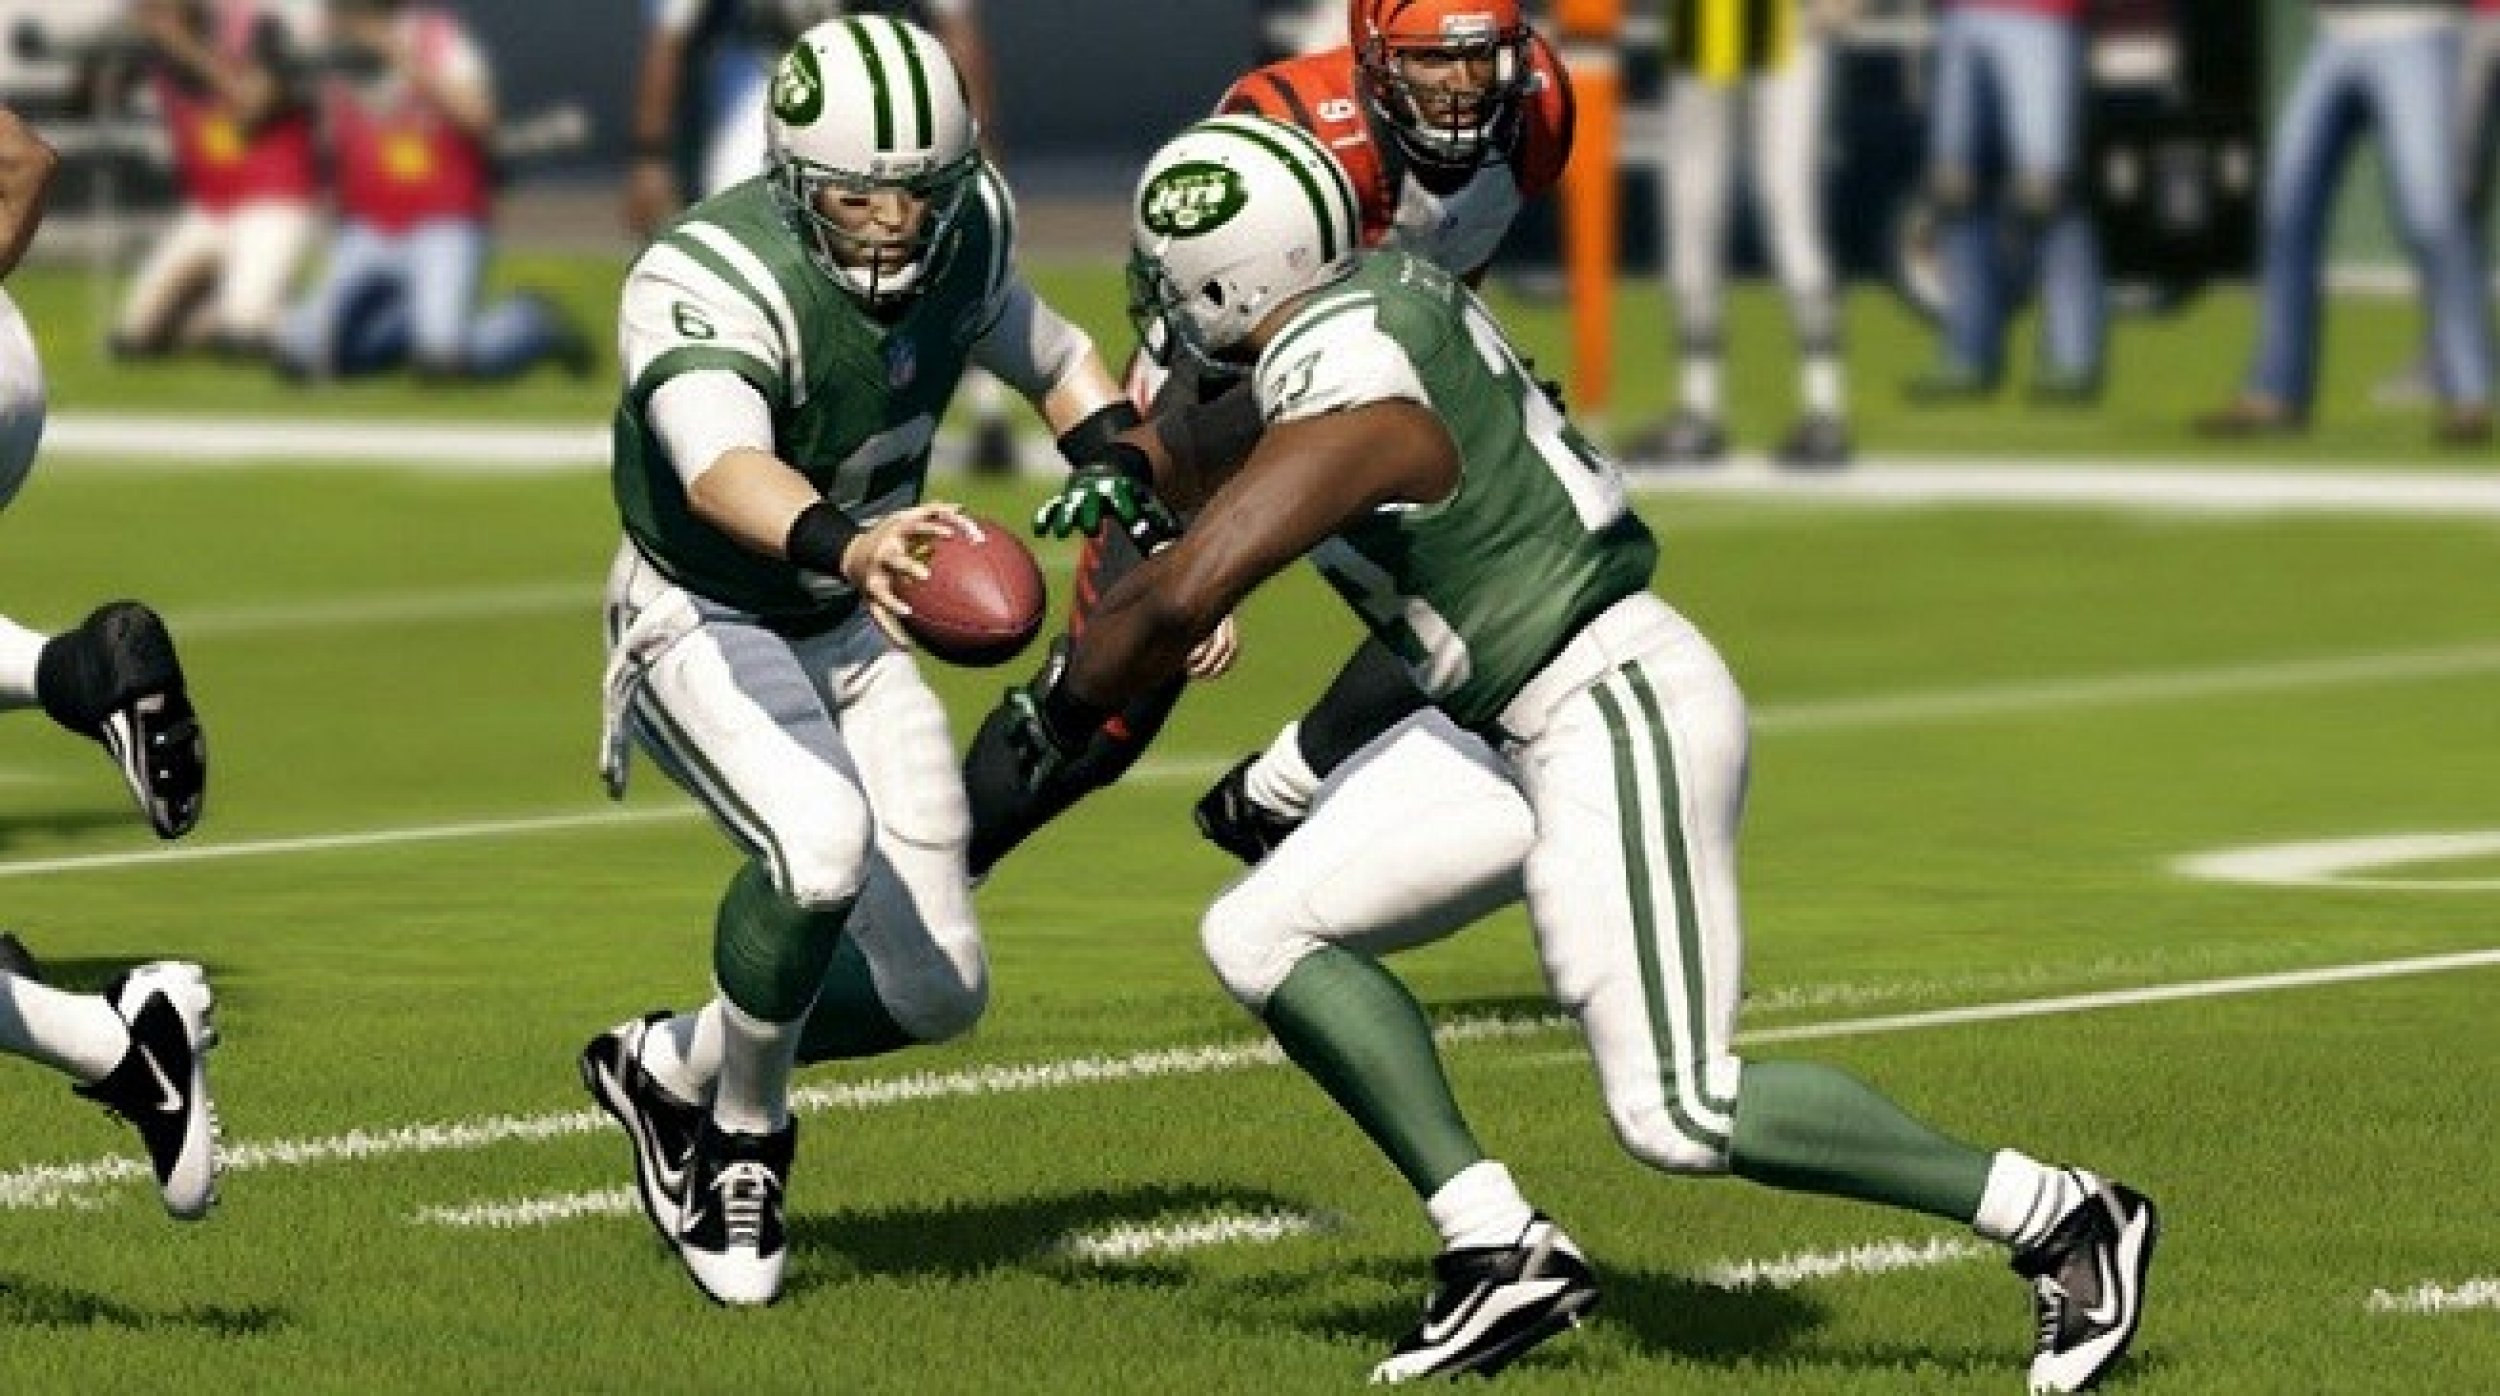 Video Game 'Madden NFL 13' Sells Record 900K Copies In One Day | IBTimes